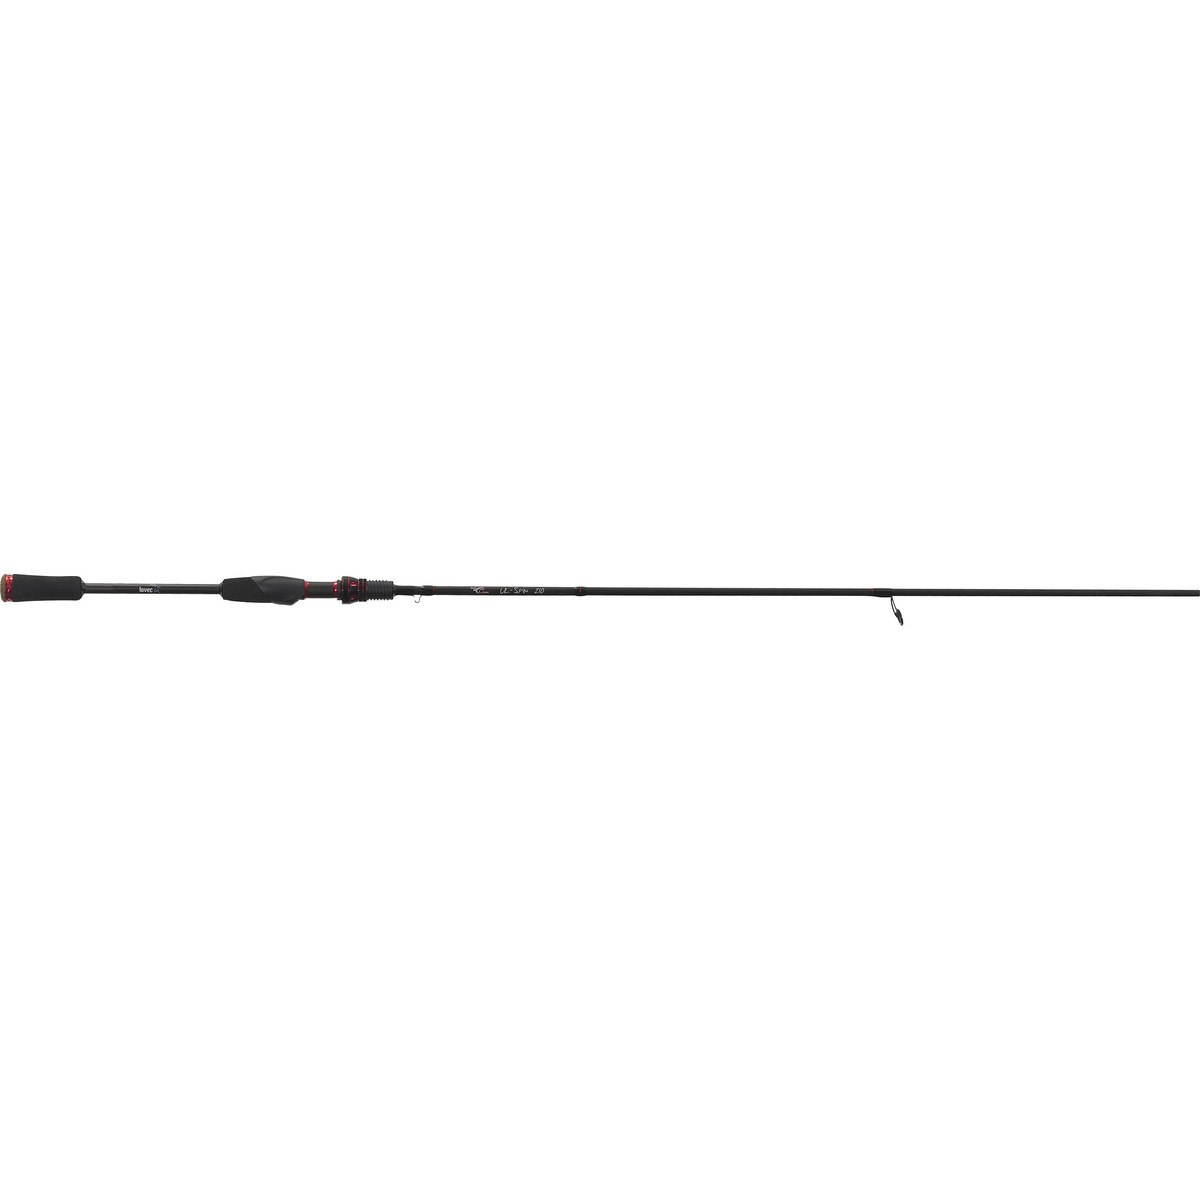 Iron Claw Lovec Rapy S - 195 cm - 2-8 g